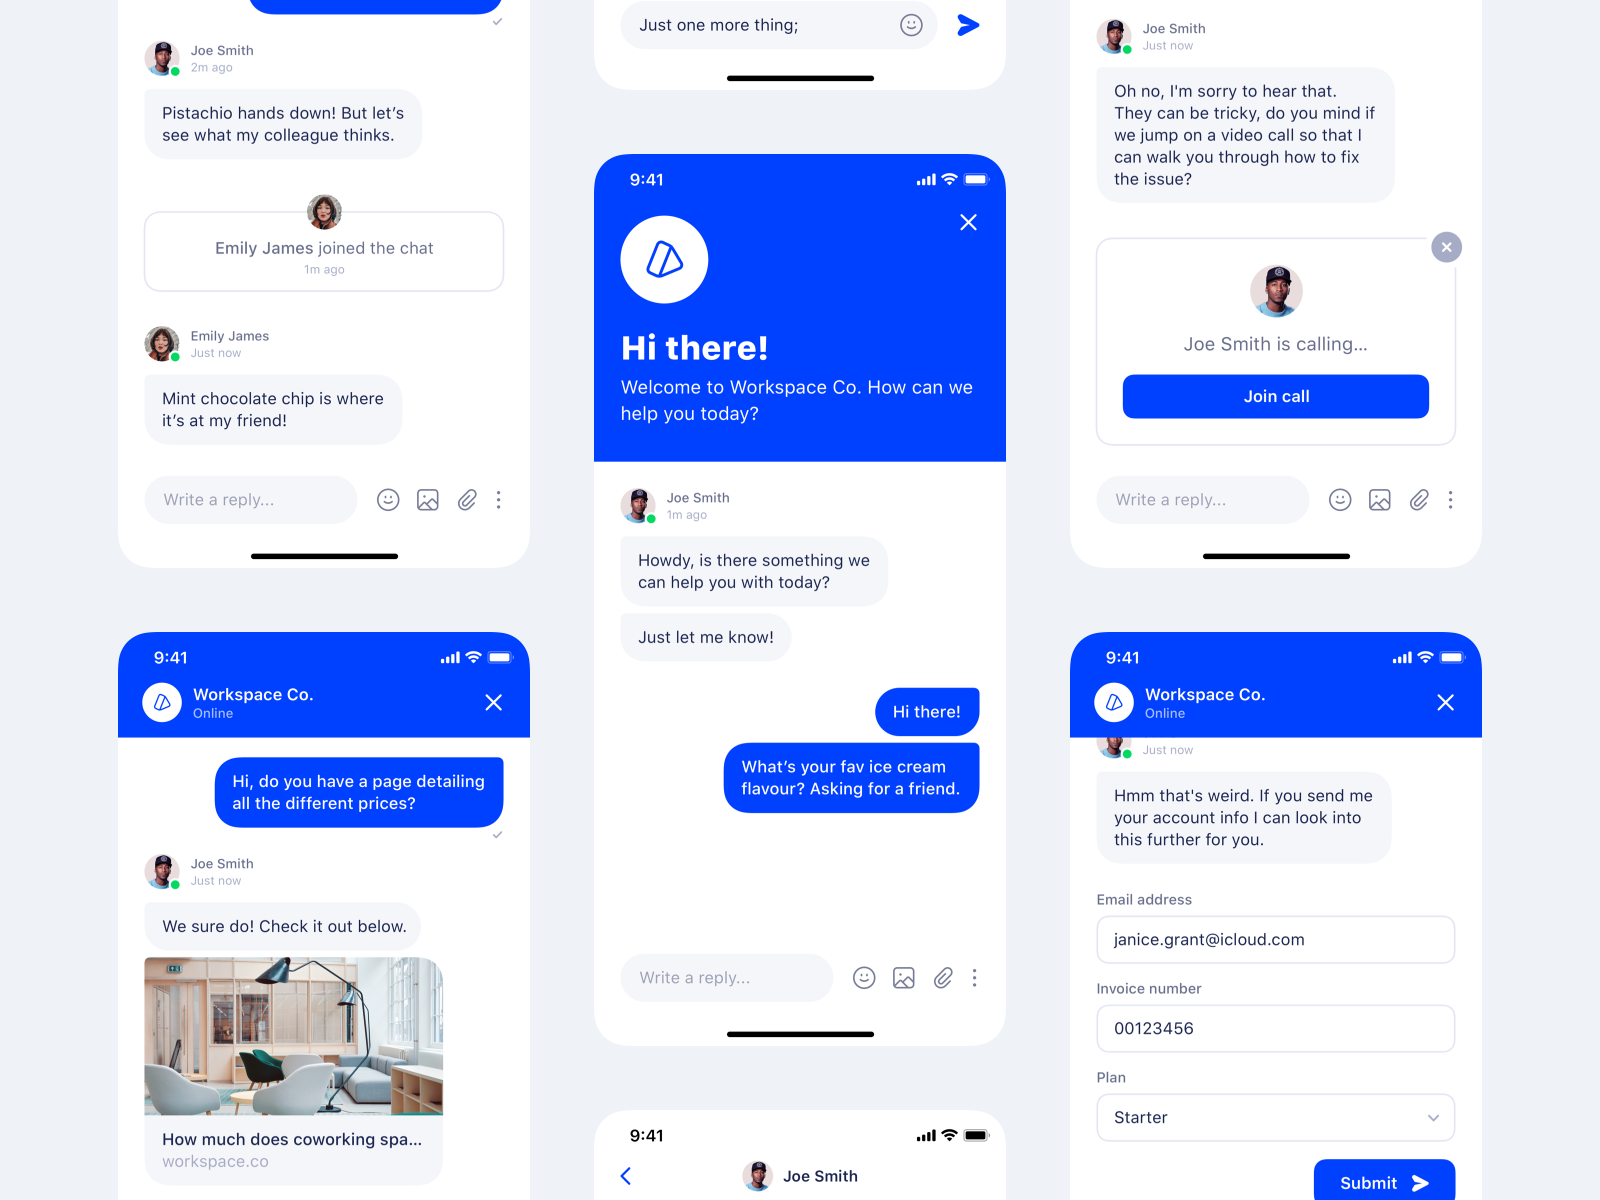 Live Chat App by Cai Cardenas on Dribbble